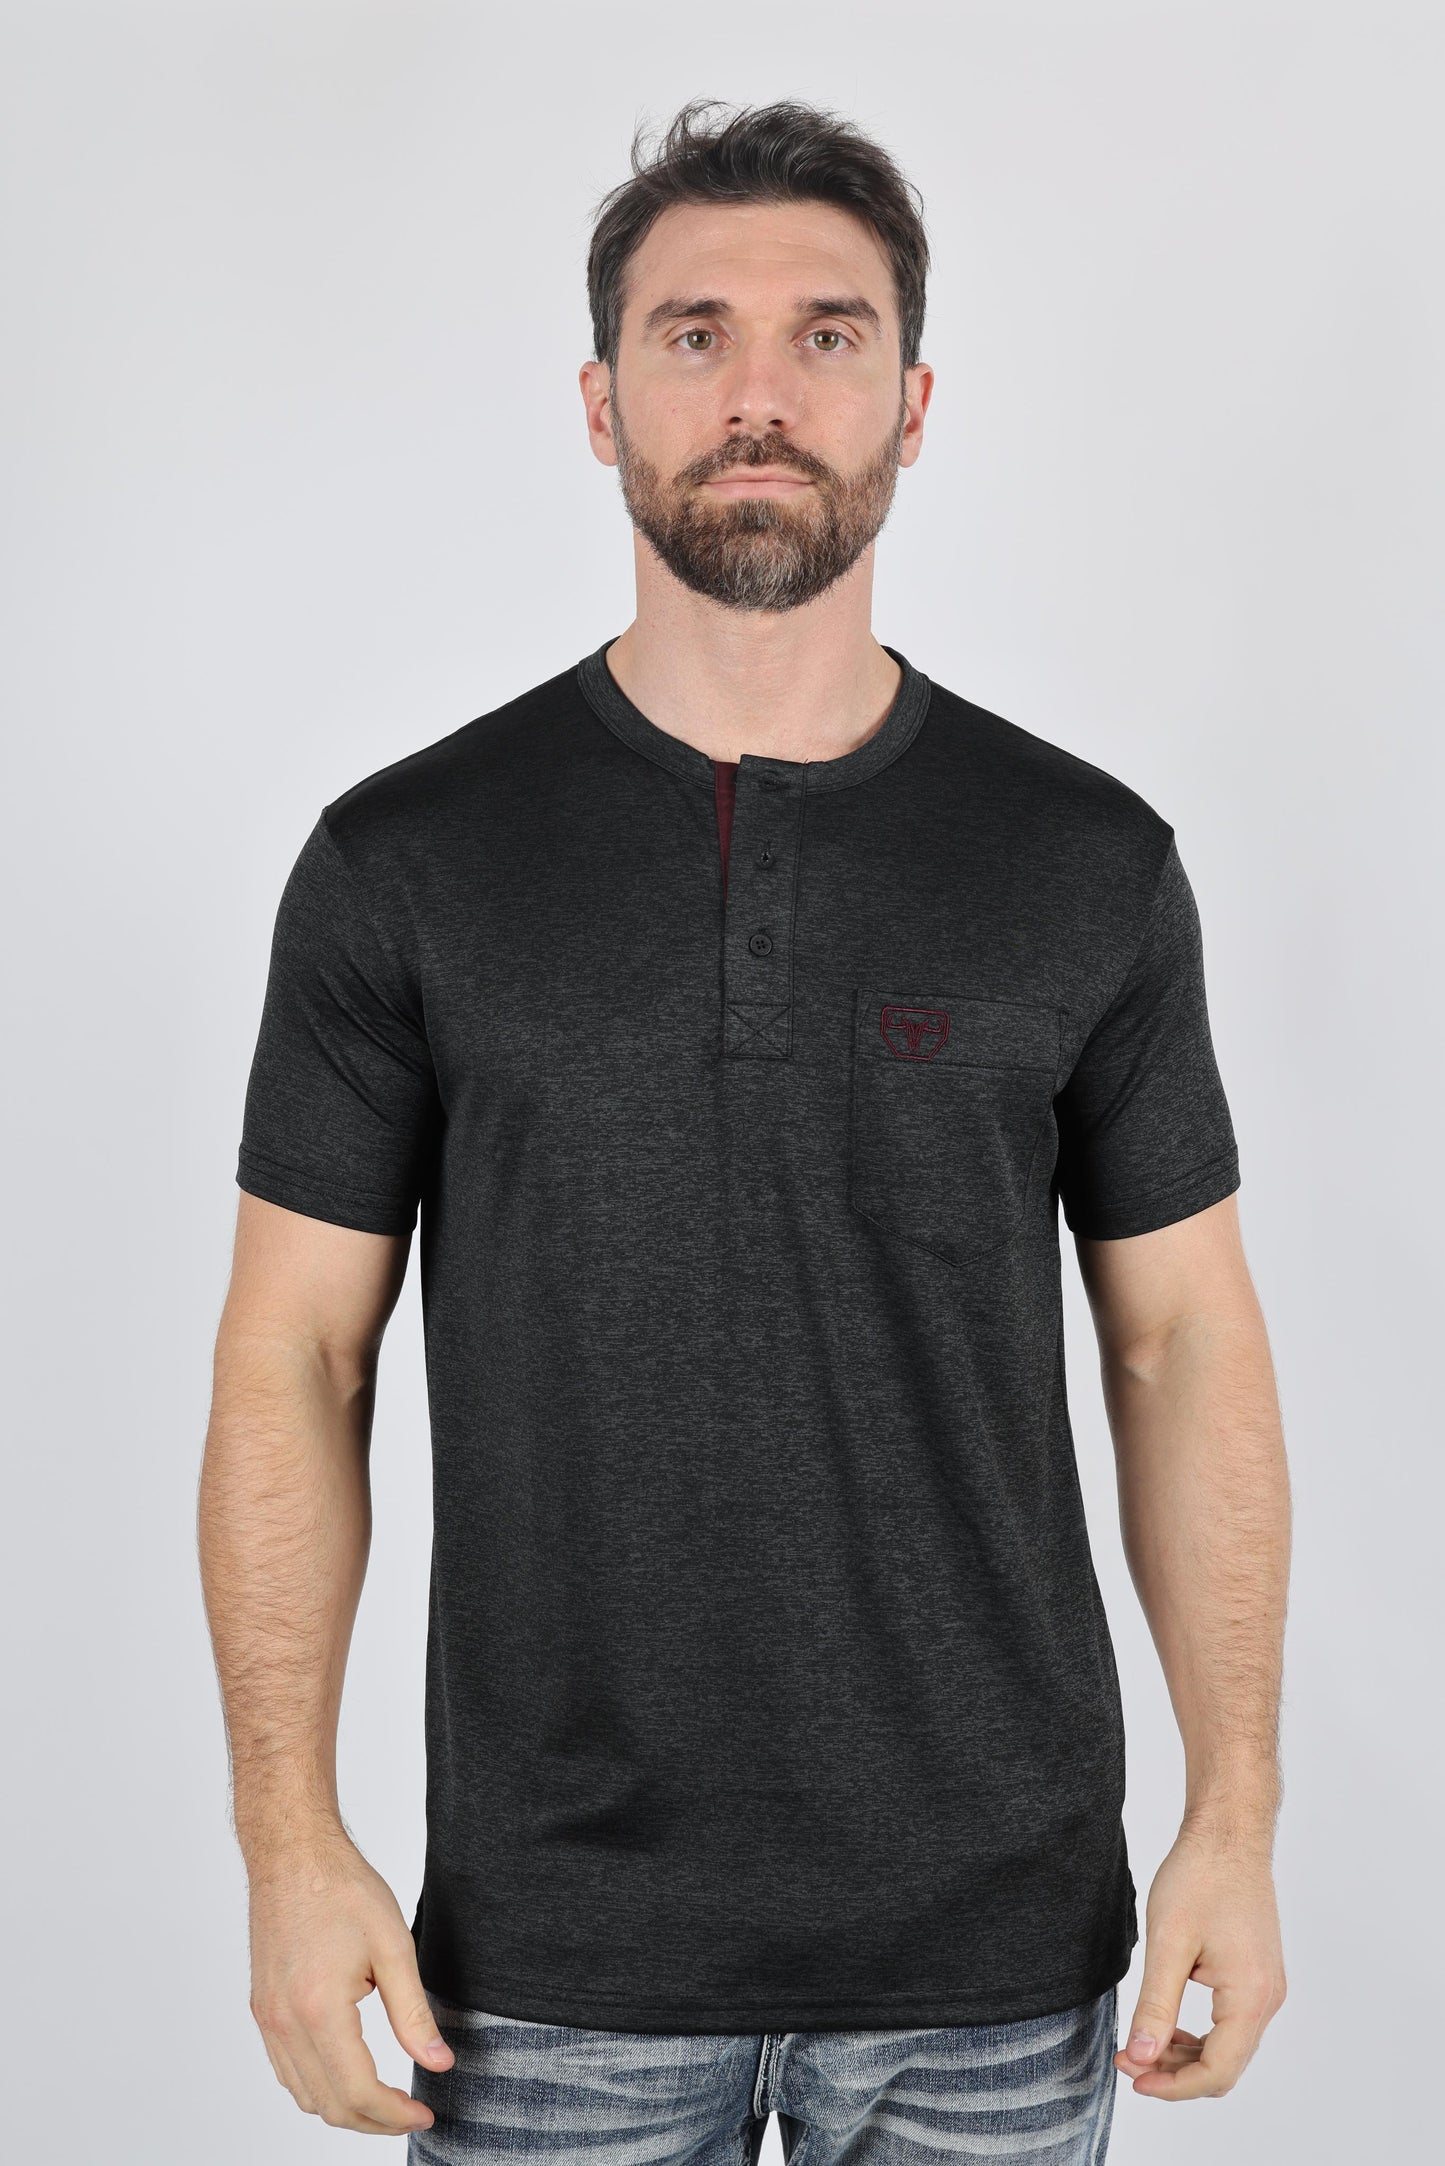 Mens Modern Fit Stretch Henley T-Shirt with Logo